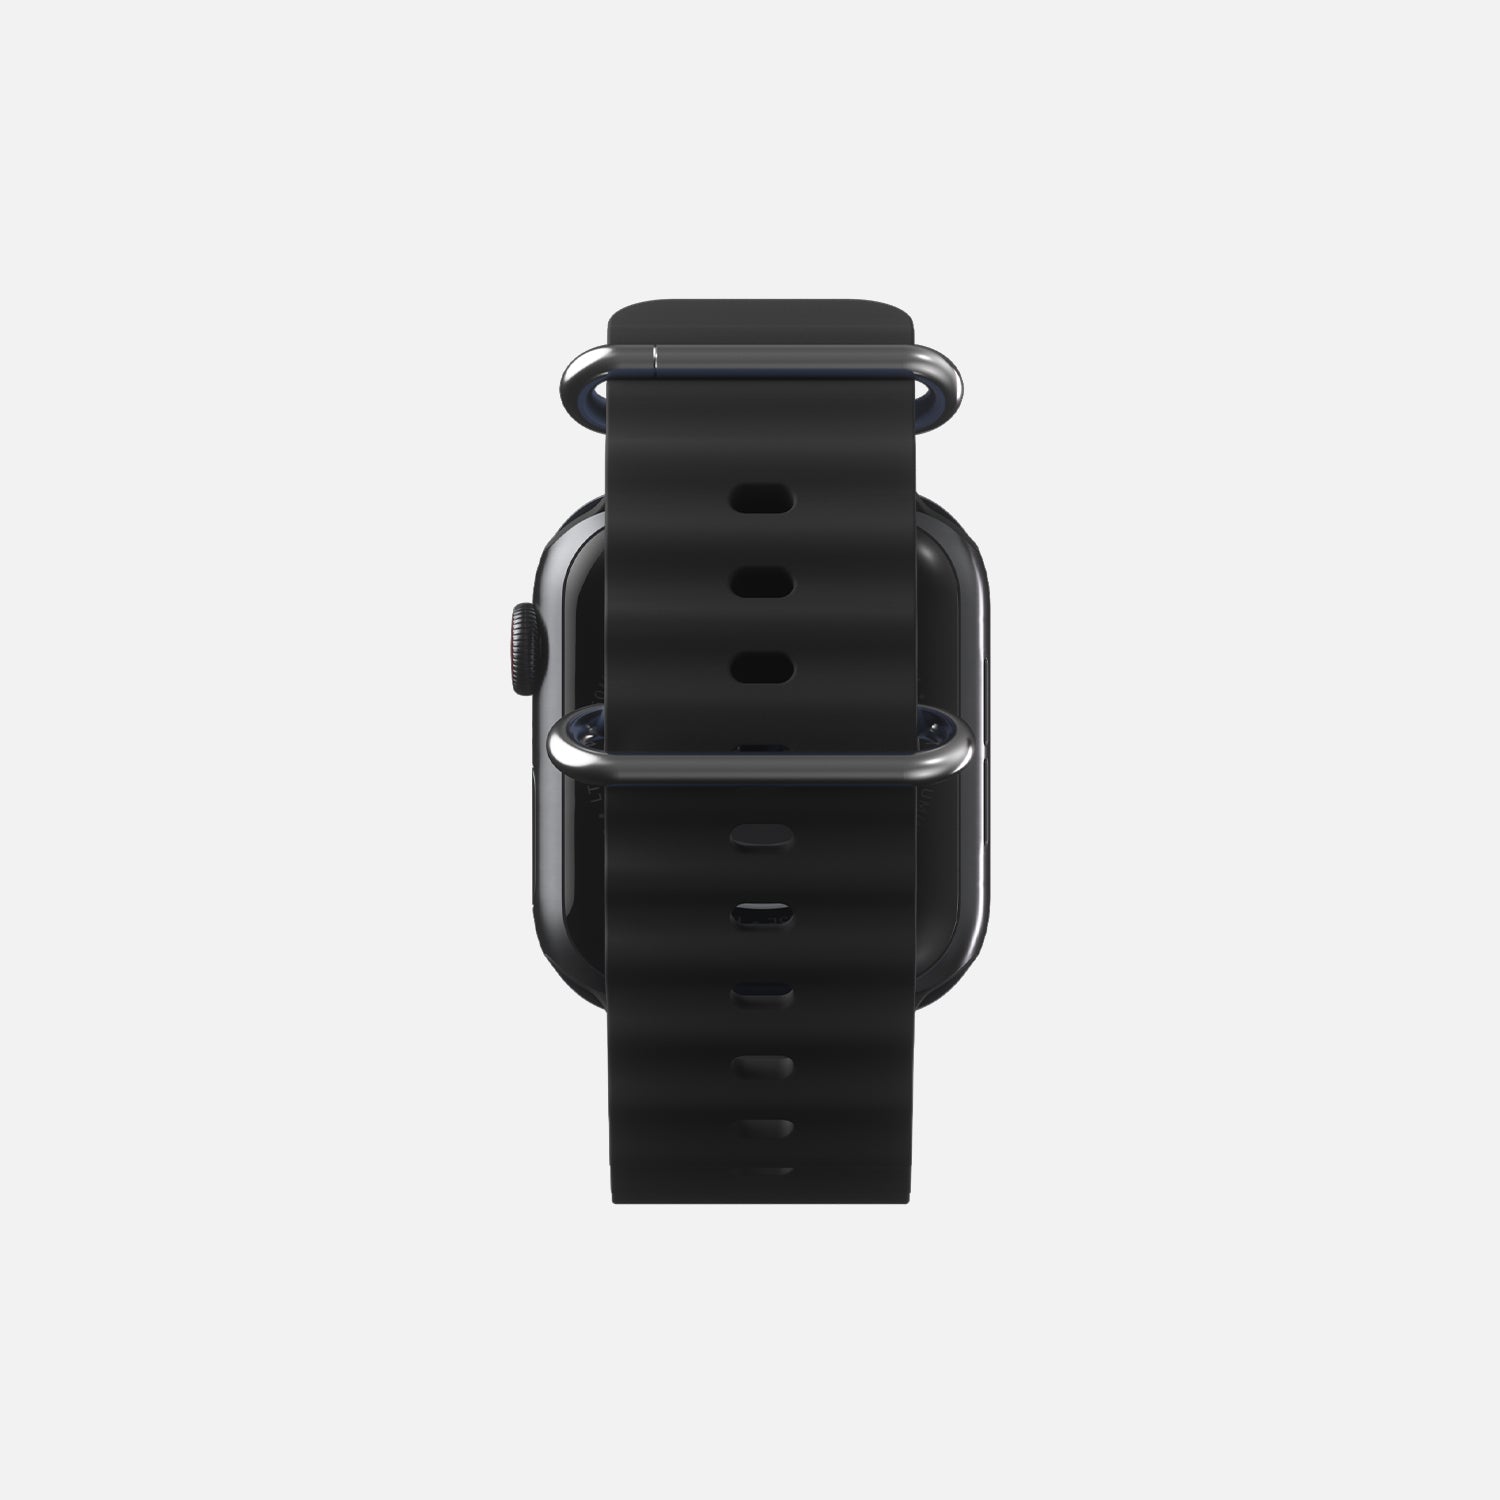 Black smartwatch with fitness tracker features isolated on a white background.